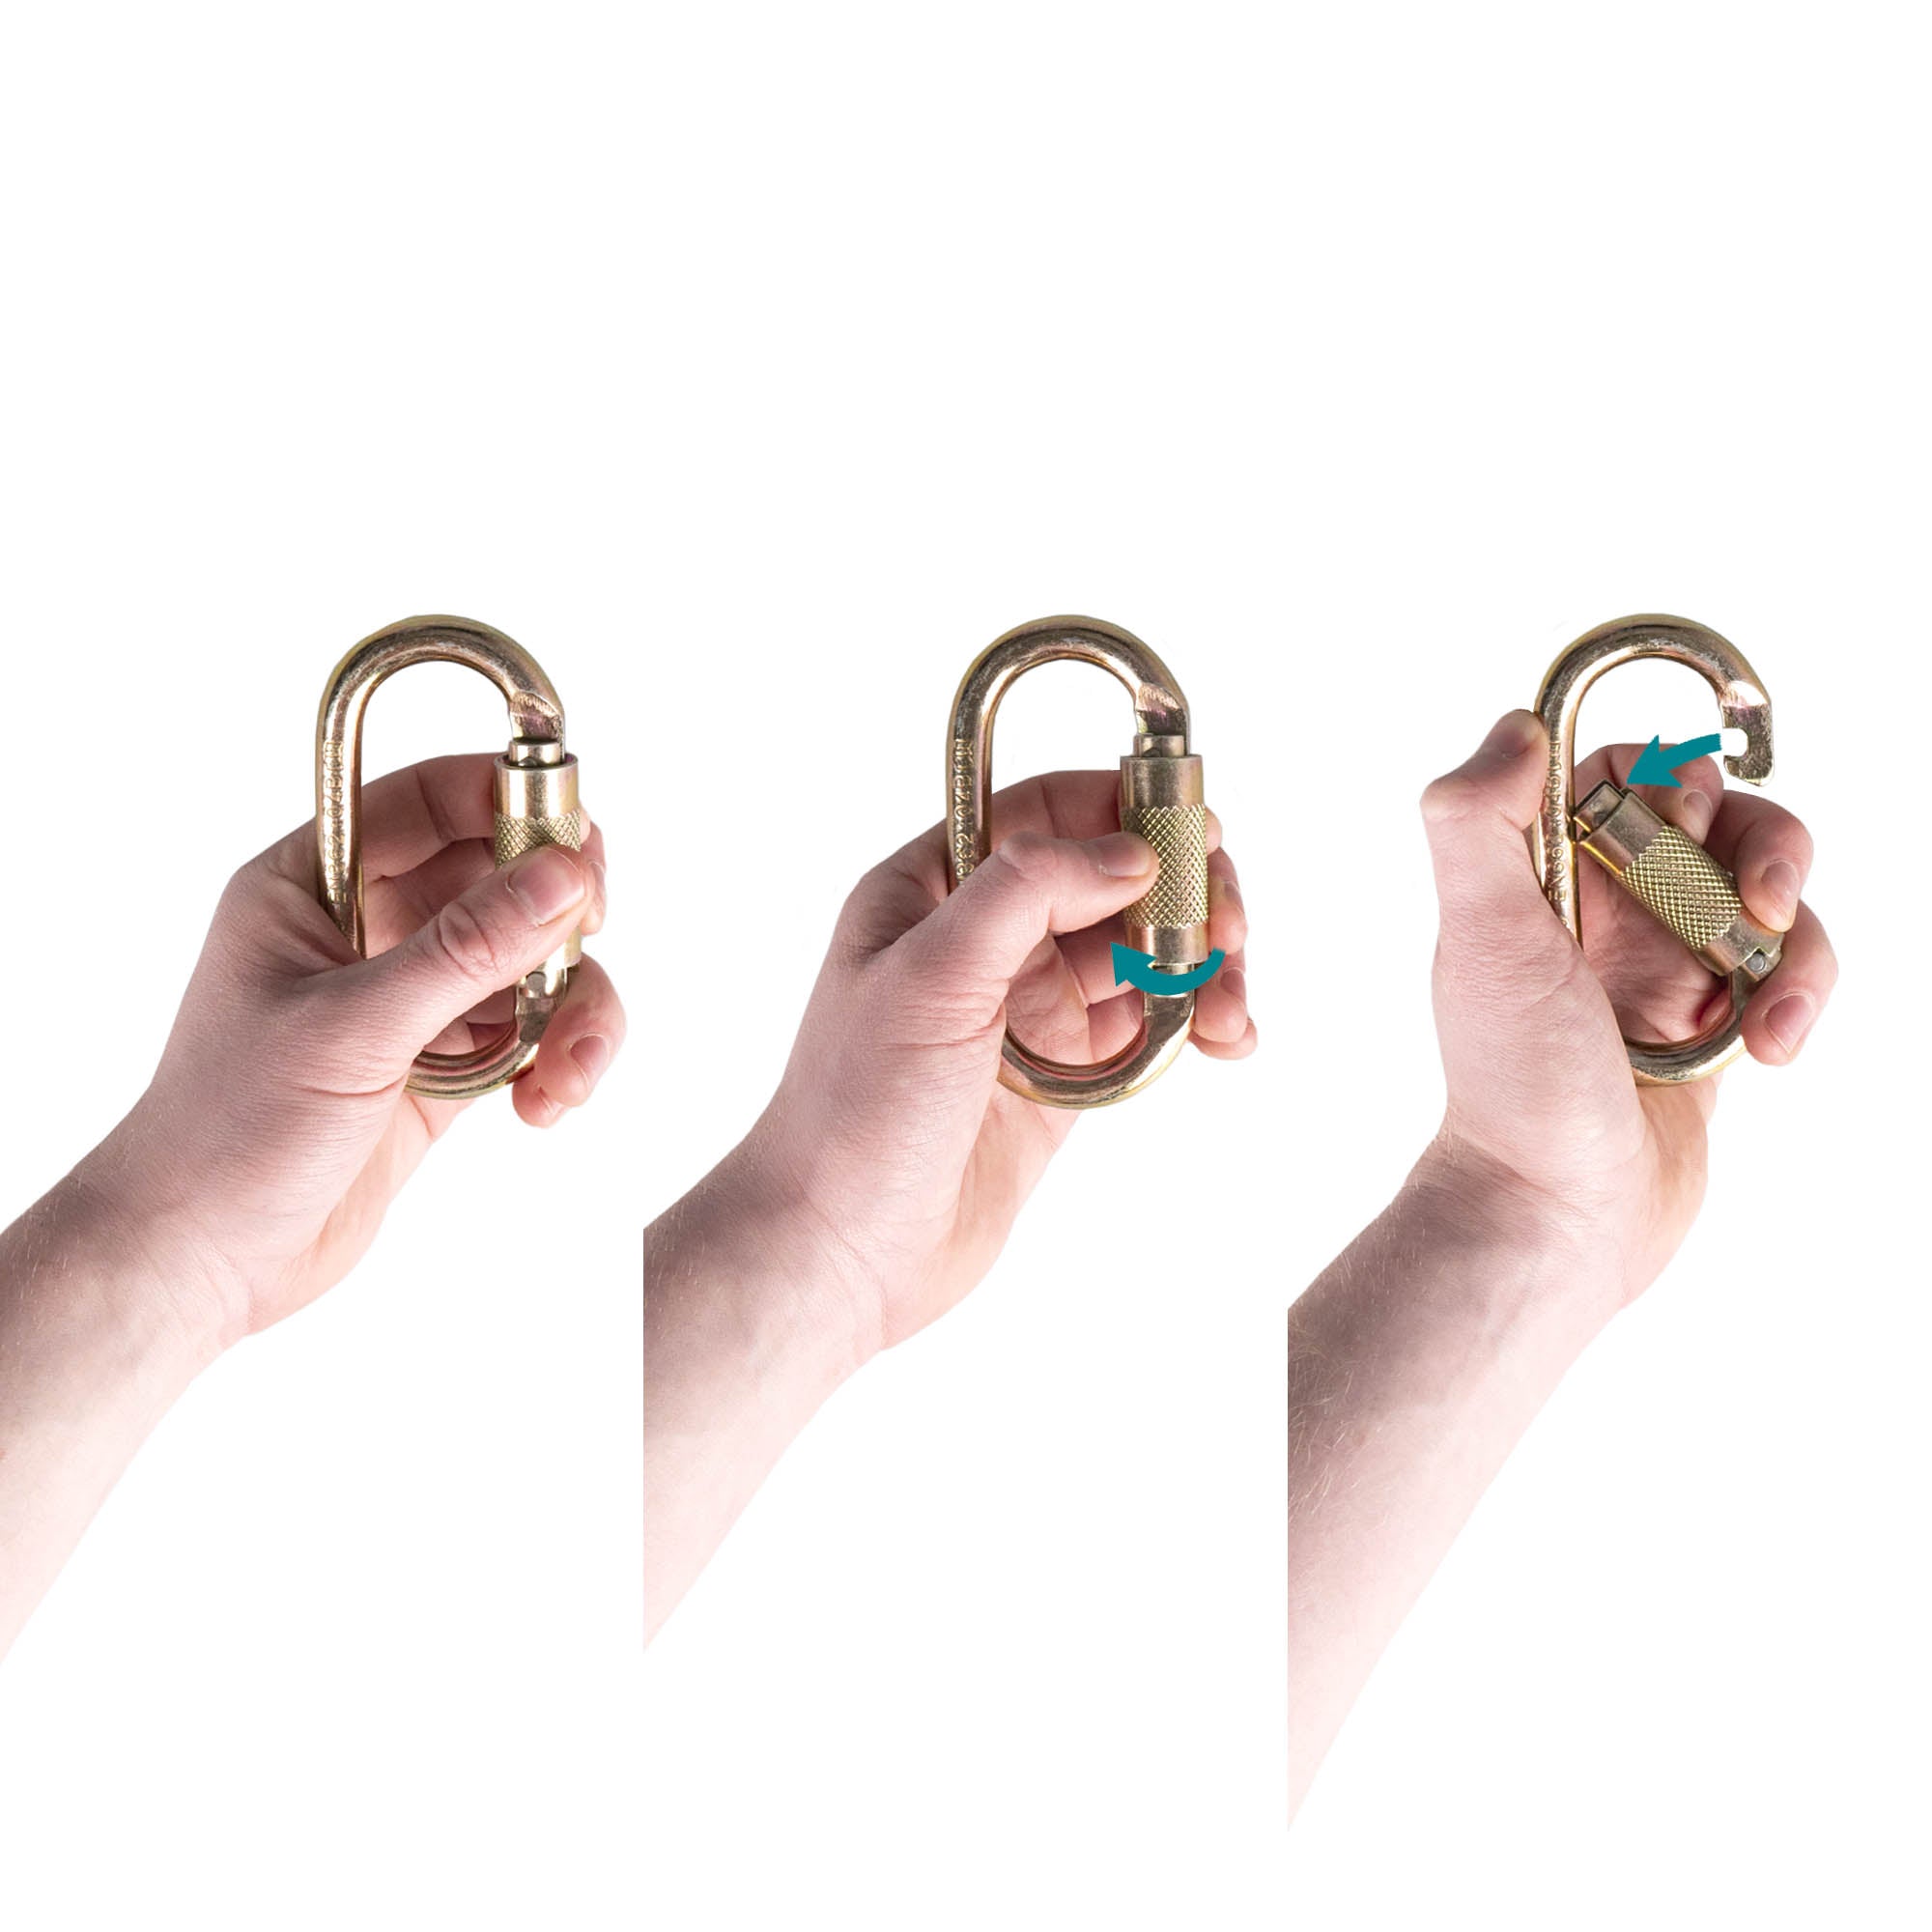 Prodigy double action carabiner sequence shot